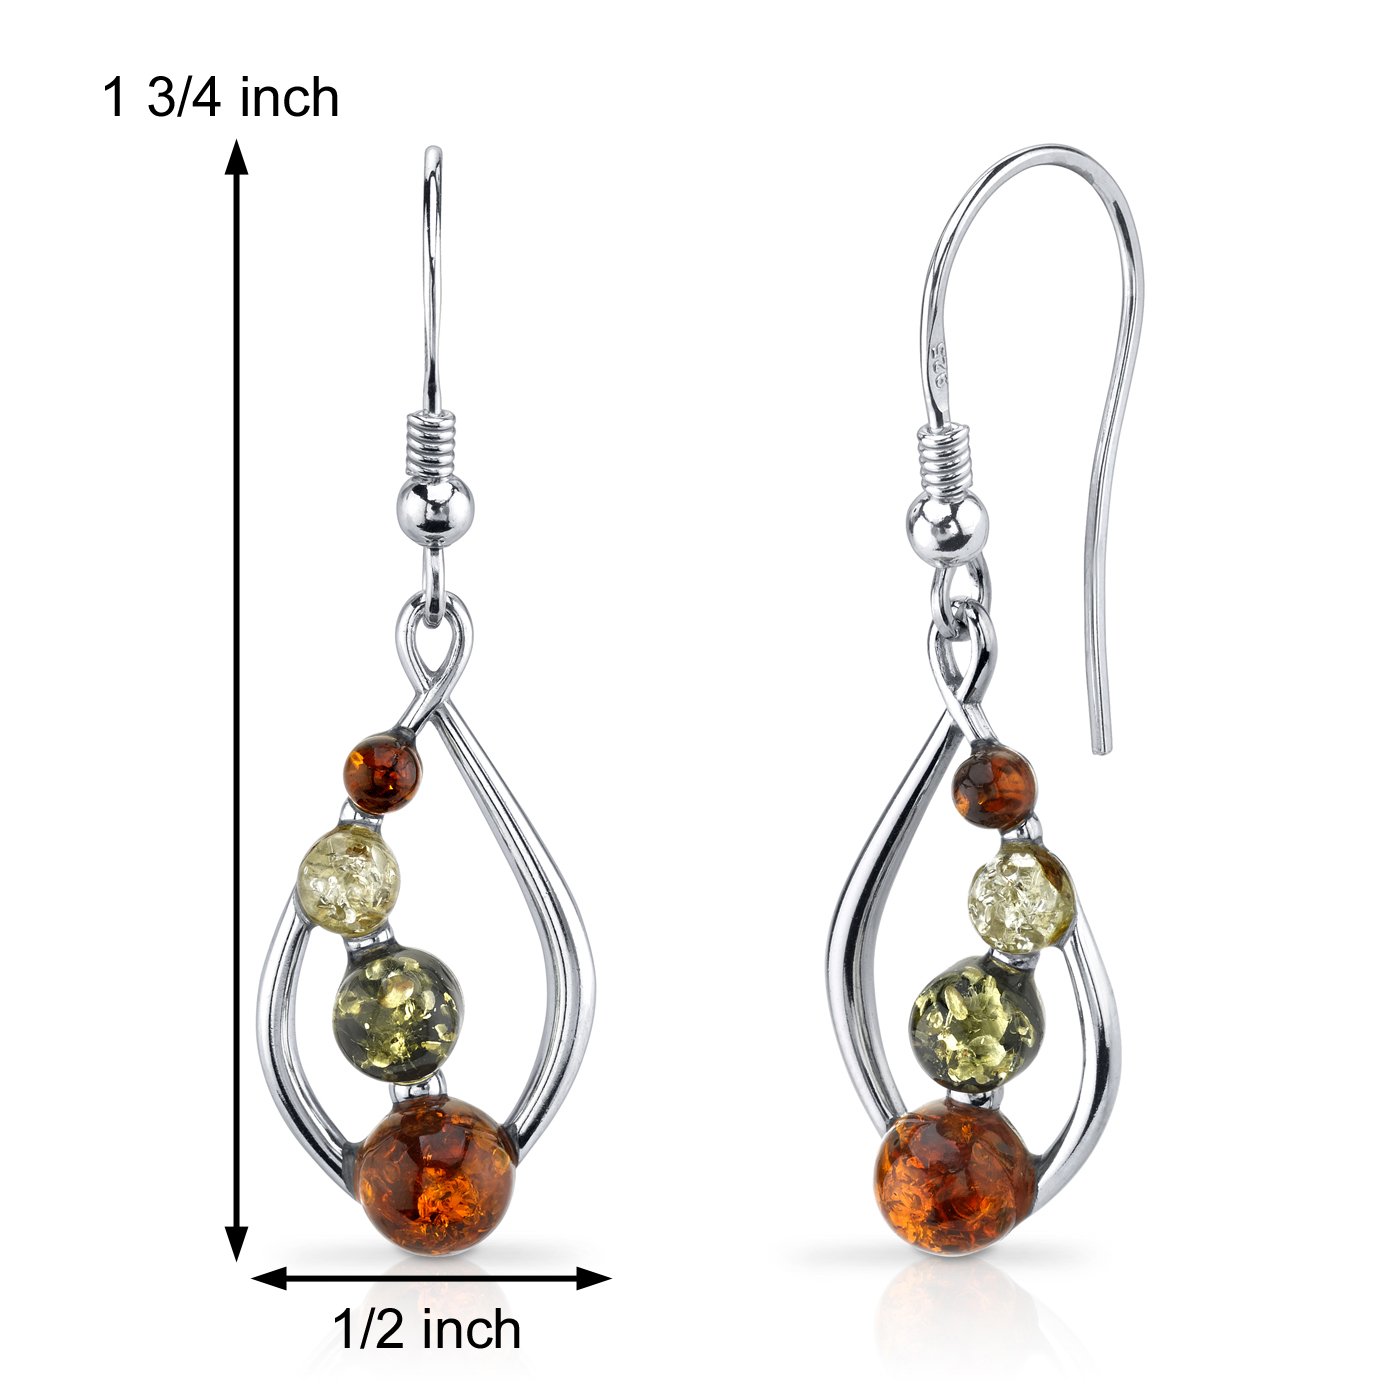 Peora Genuine Multicolor Baltic Amber Open Leaf Pendant Necklace, Earrings and Bracelet in Sterling Silver